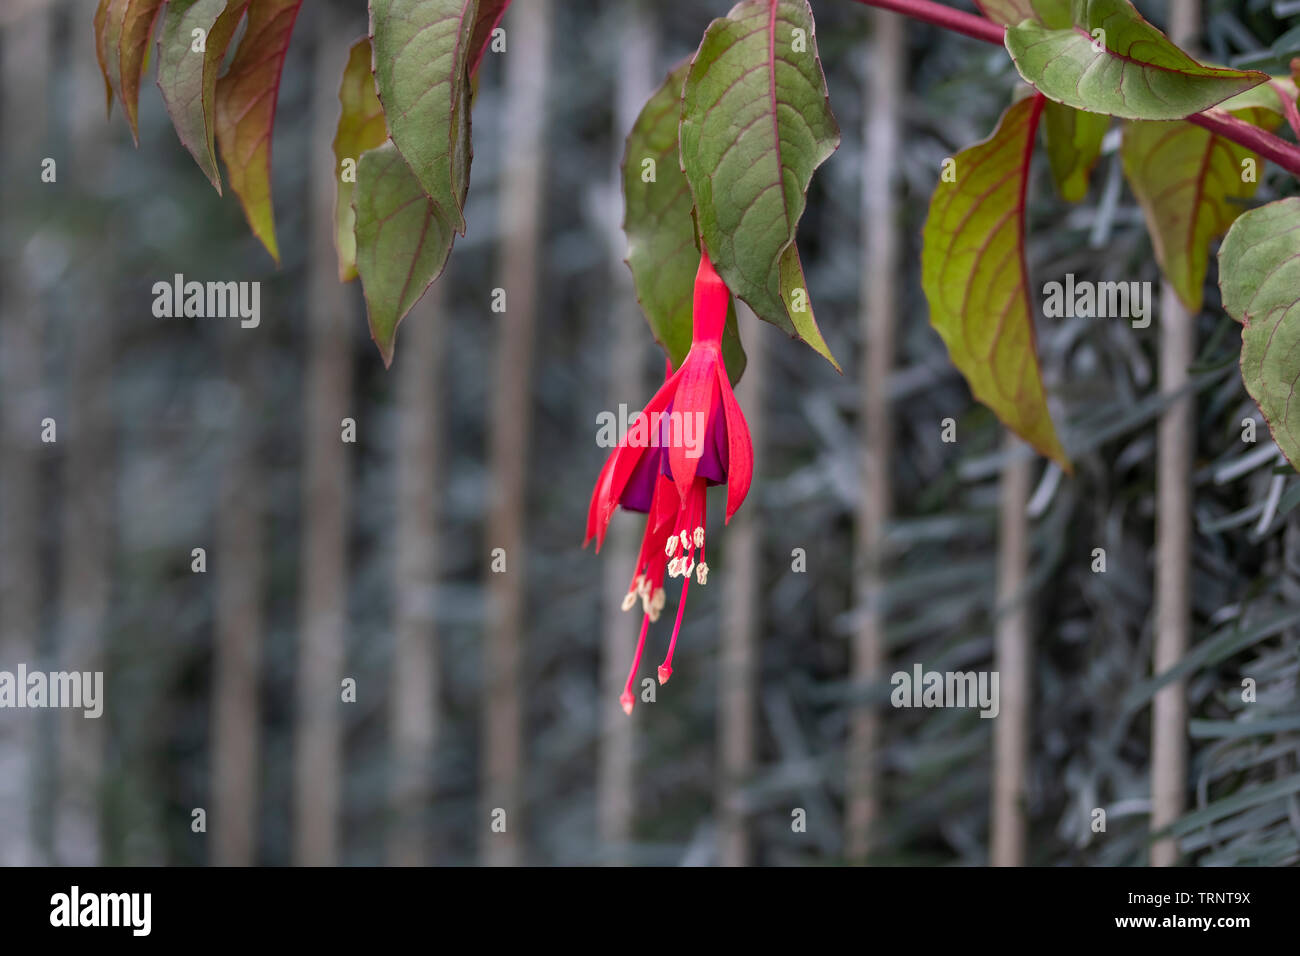 Fuchsia 'Mrs Popple plant flowers against the background of green foliage and gray fence on a sunny spring day Stock Photo